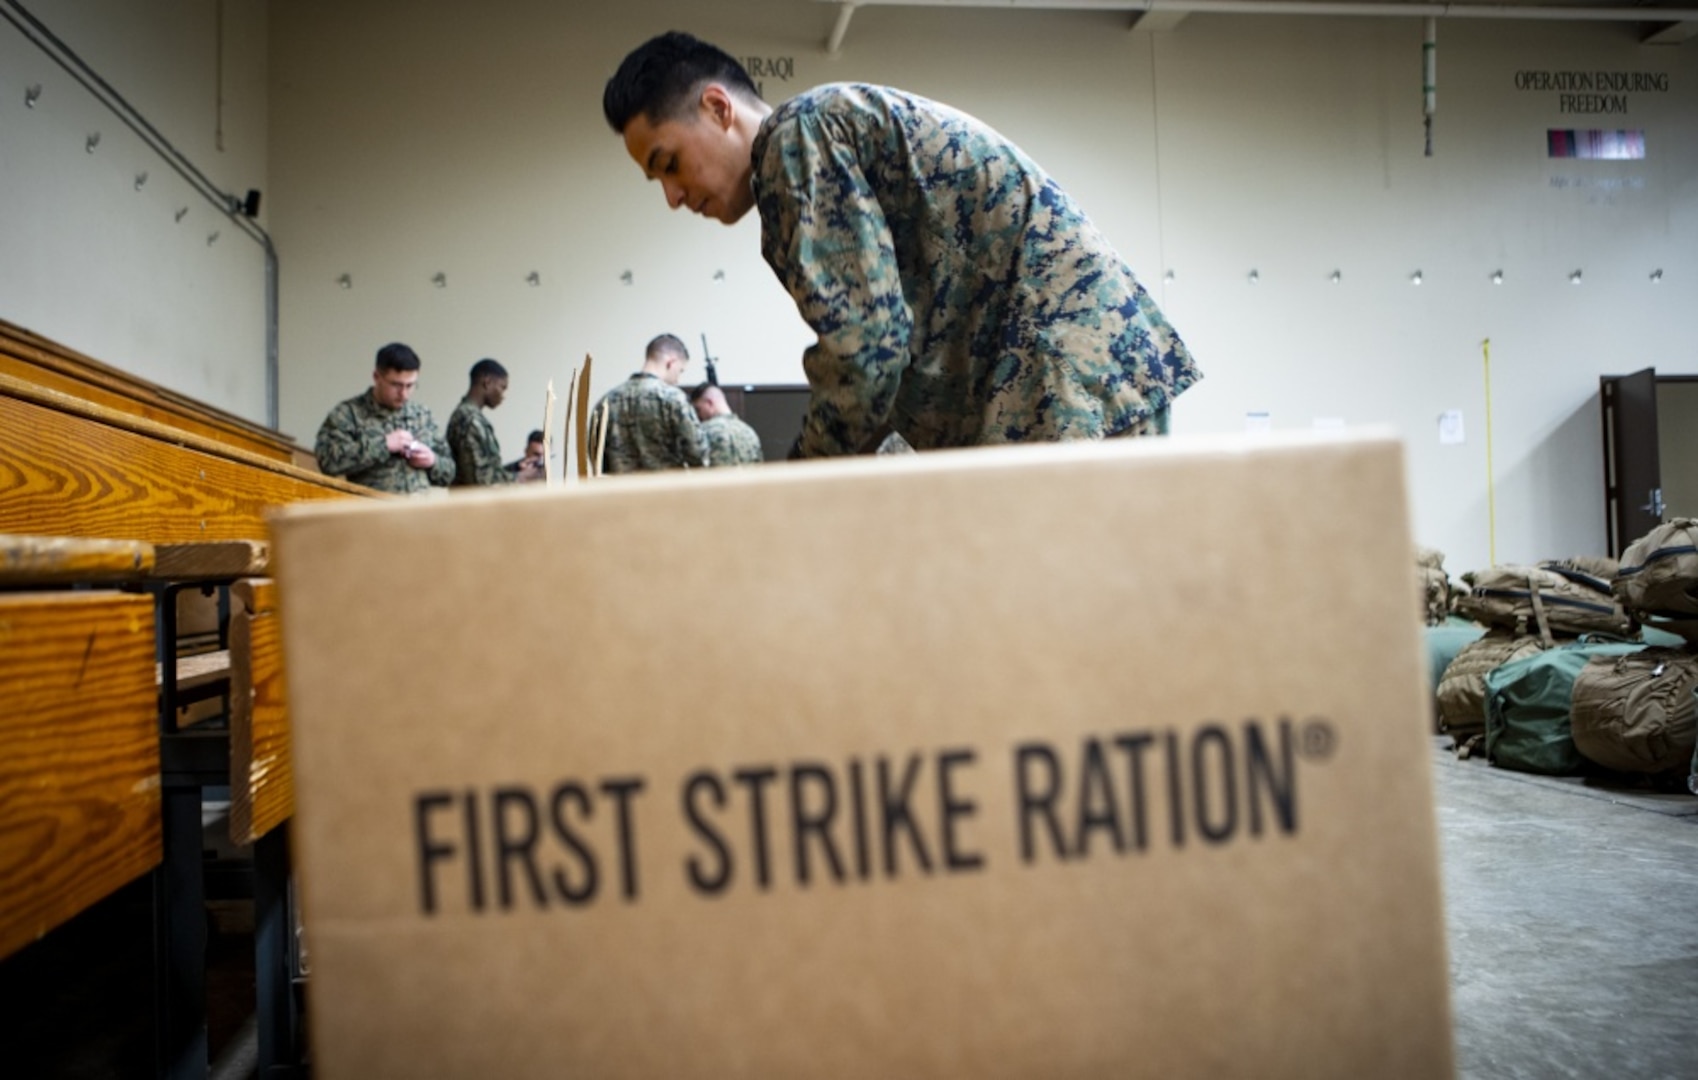 Marine stands next to meal ration box.